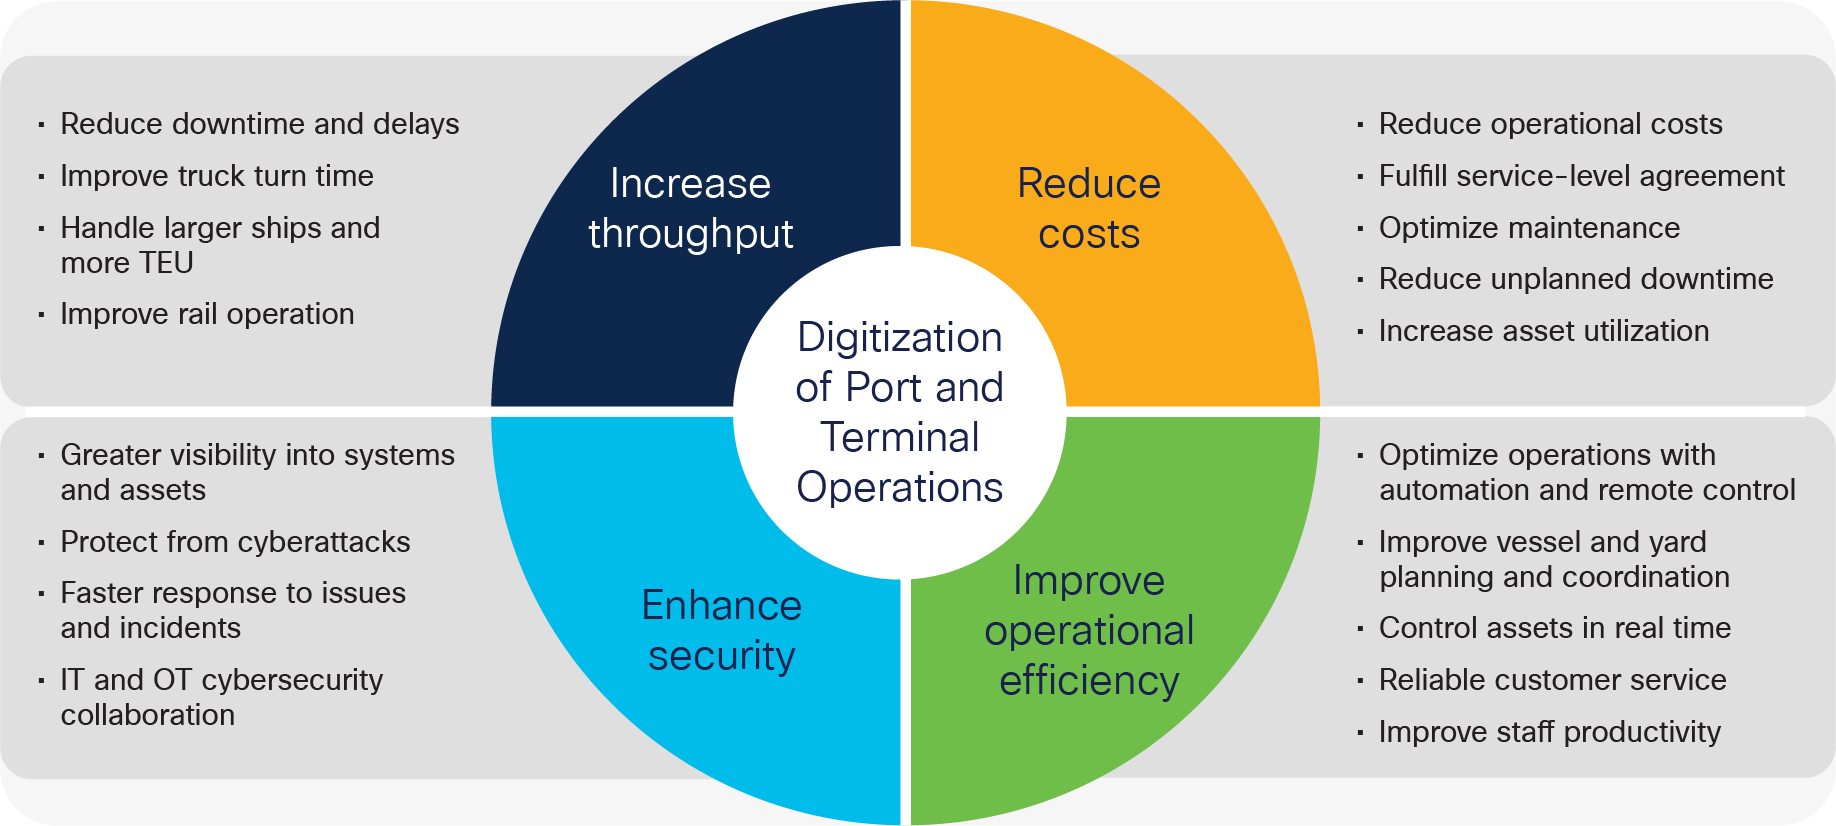 Business objectives in port and terminal operations